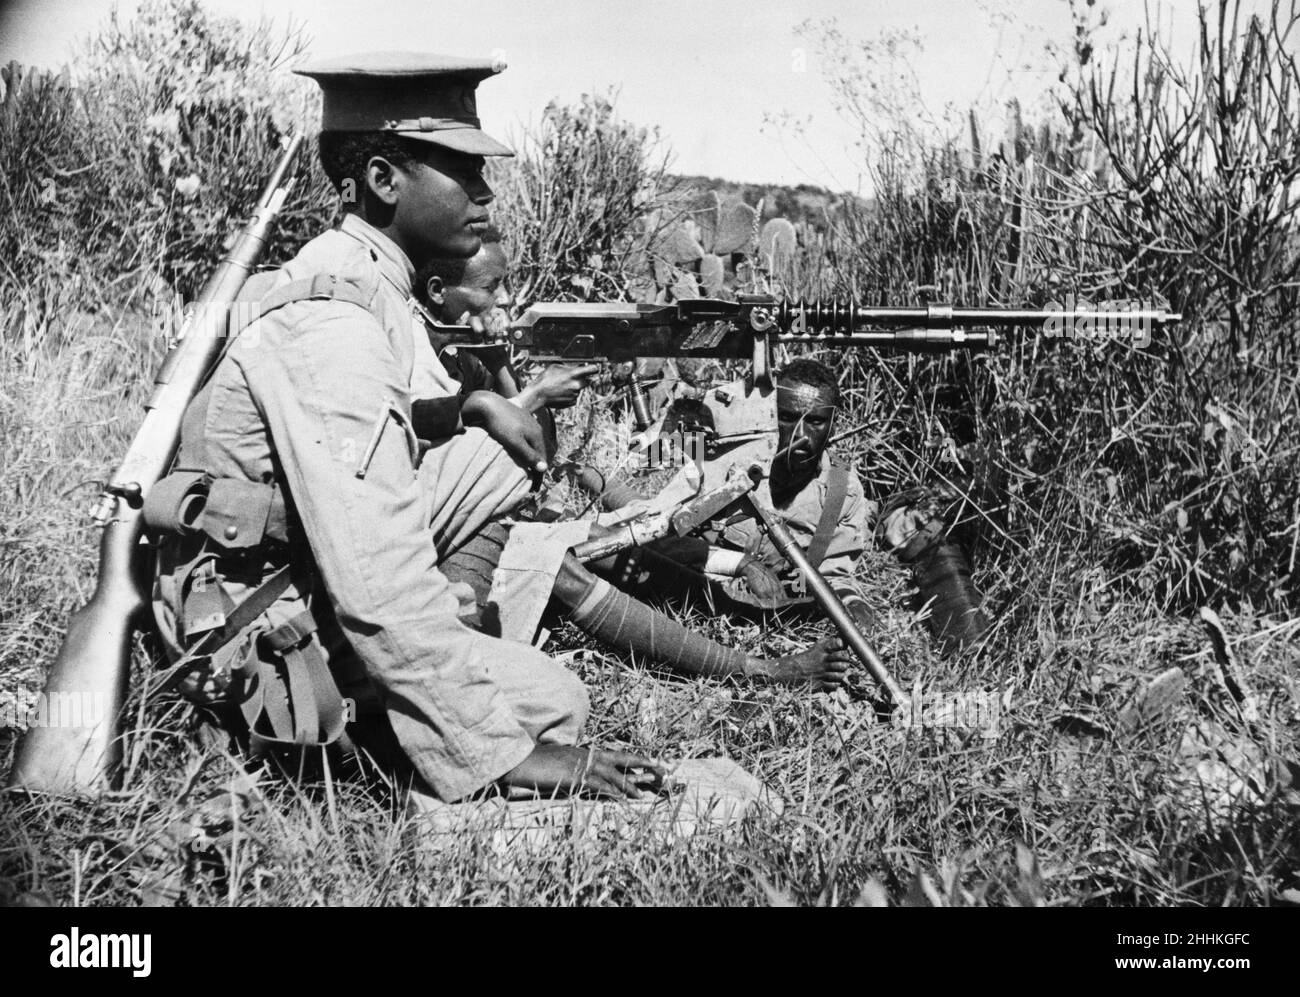 Abyssinian War September 1935Abyssinian machine gunner firing an old Hotchkiss machine gun on the Ogadan front during the Italian invasion of Abyssinia. Stock Photo